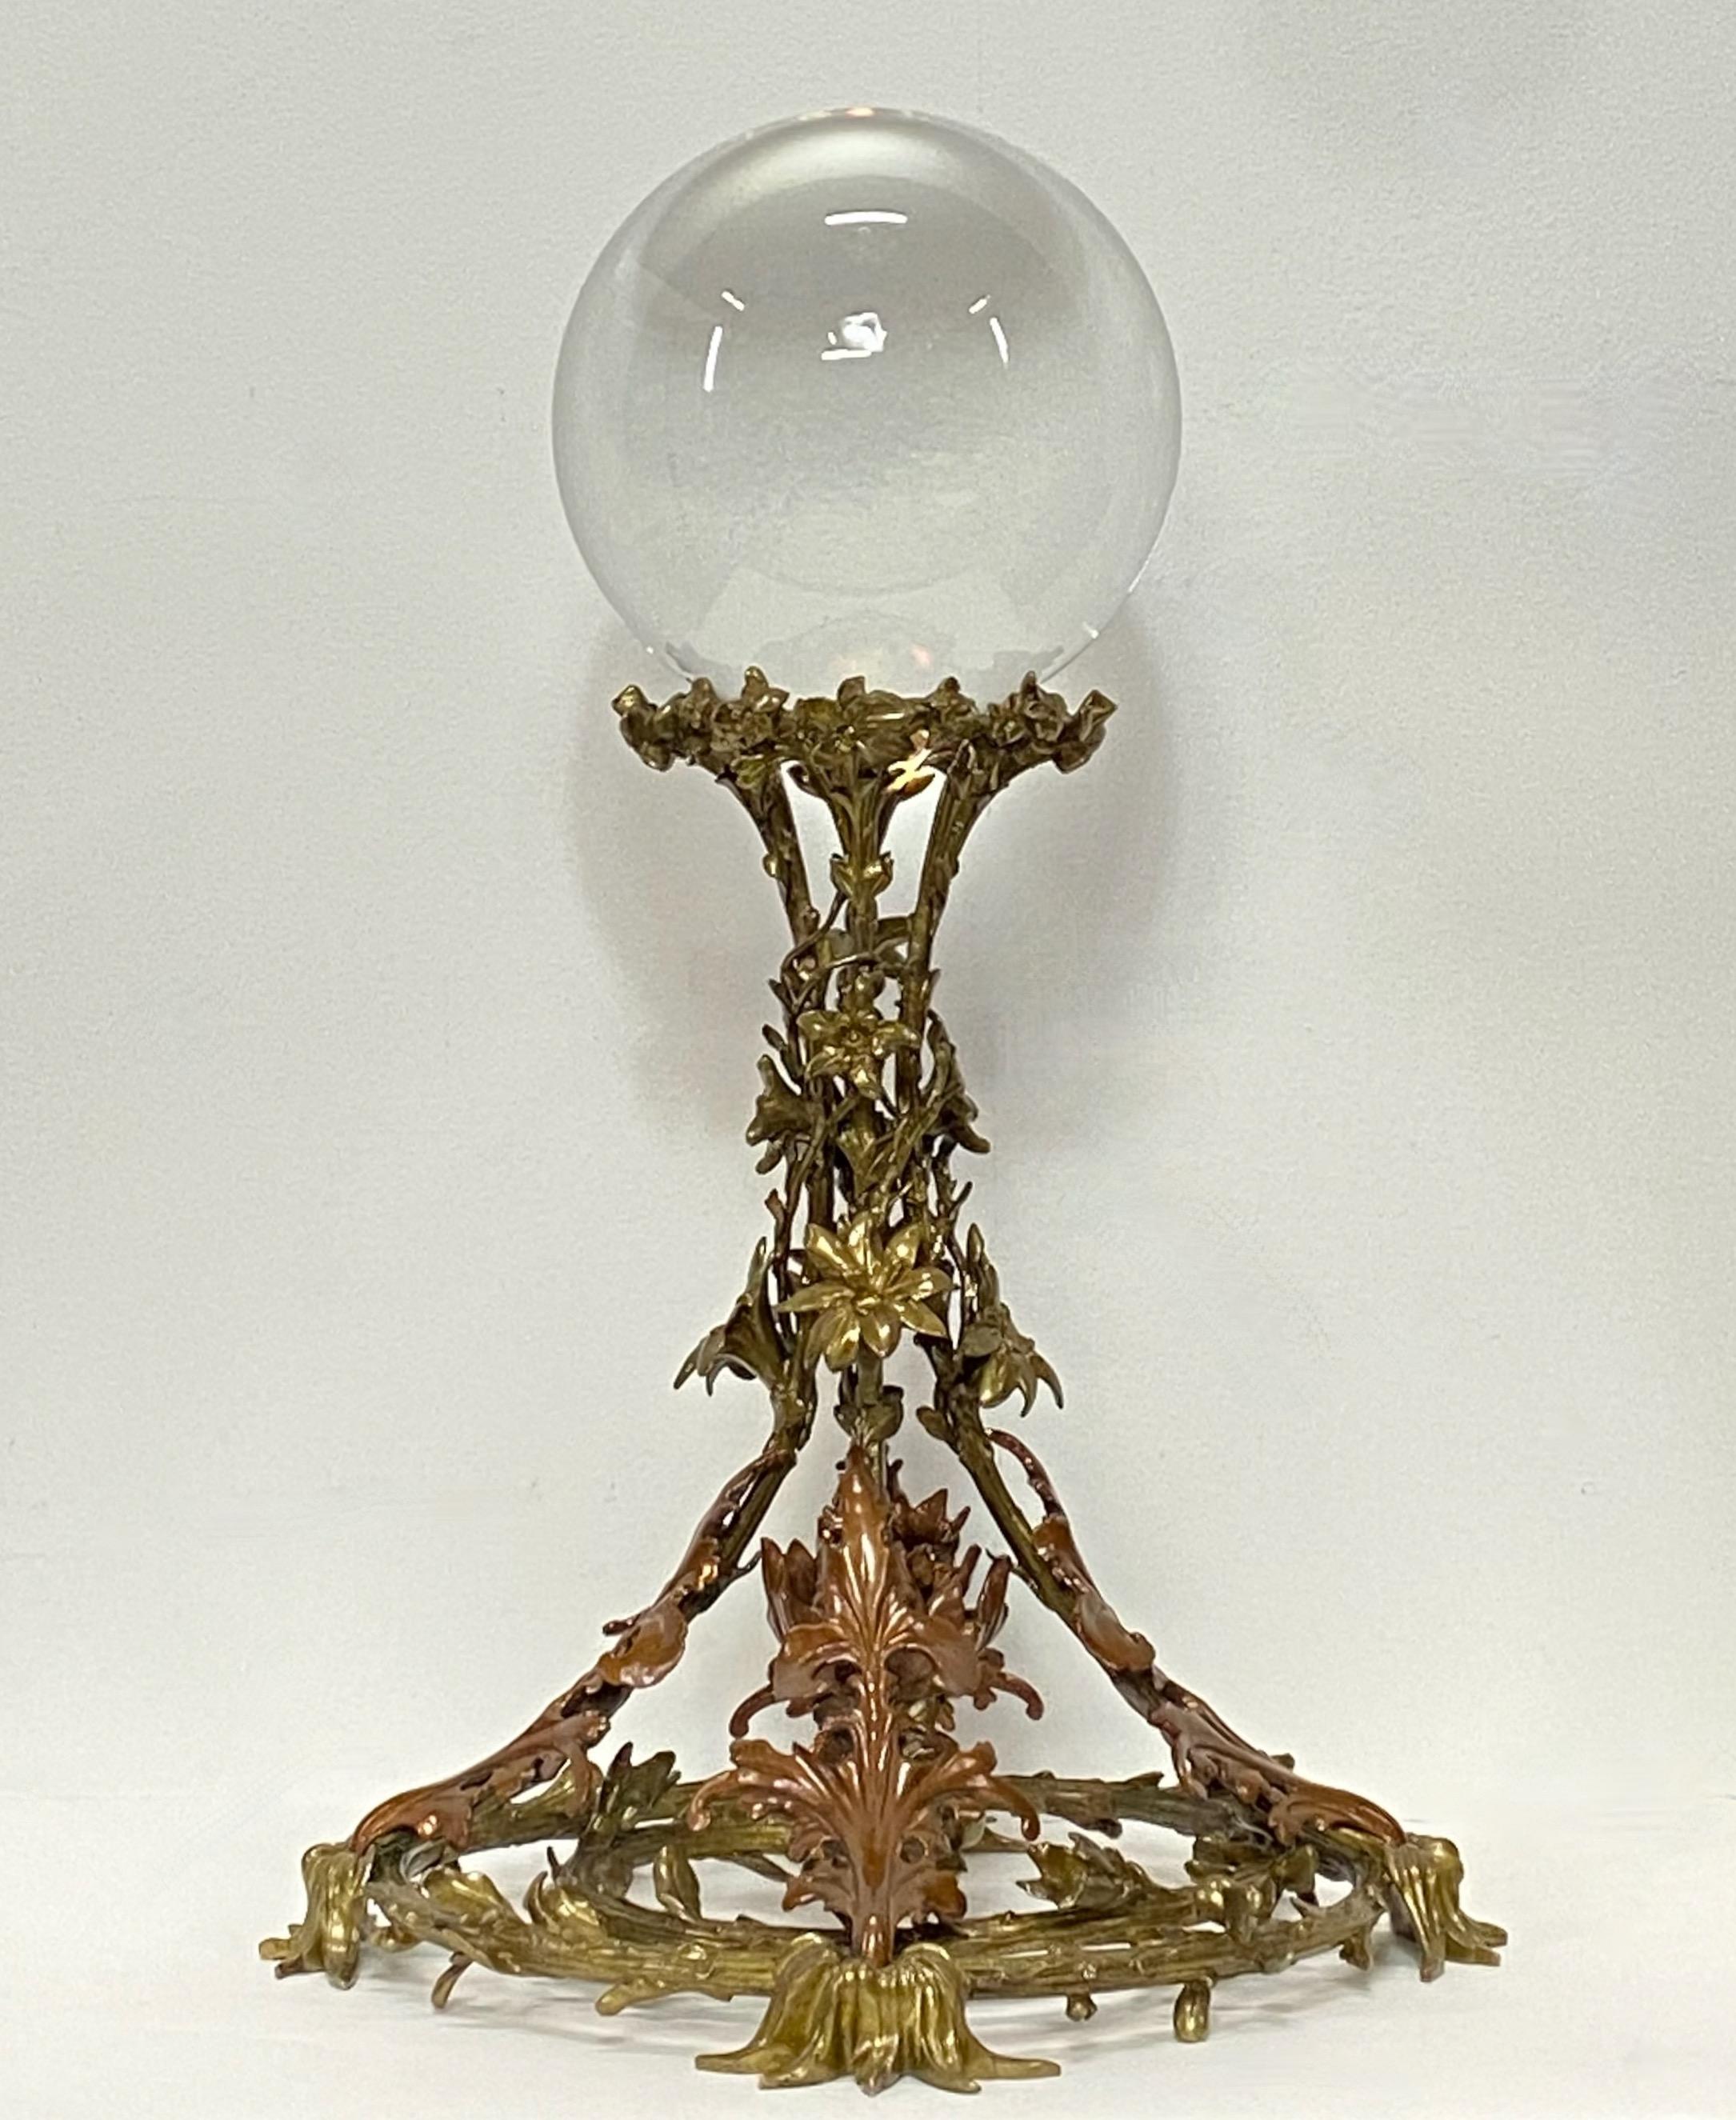 A large crystal ball presented on a unique one of a kind elaborately cast bronze base. This beautiful late 19th-early 20th century base is an unusual two-tone red and gold bronze color with flowering vines.
The crystal ball measures 8 inches in